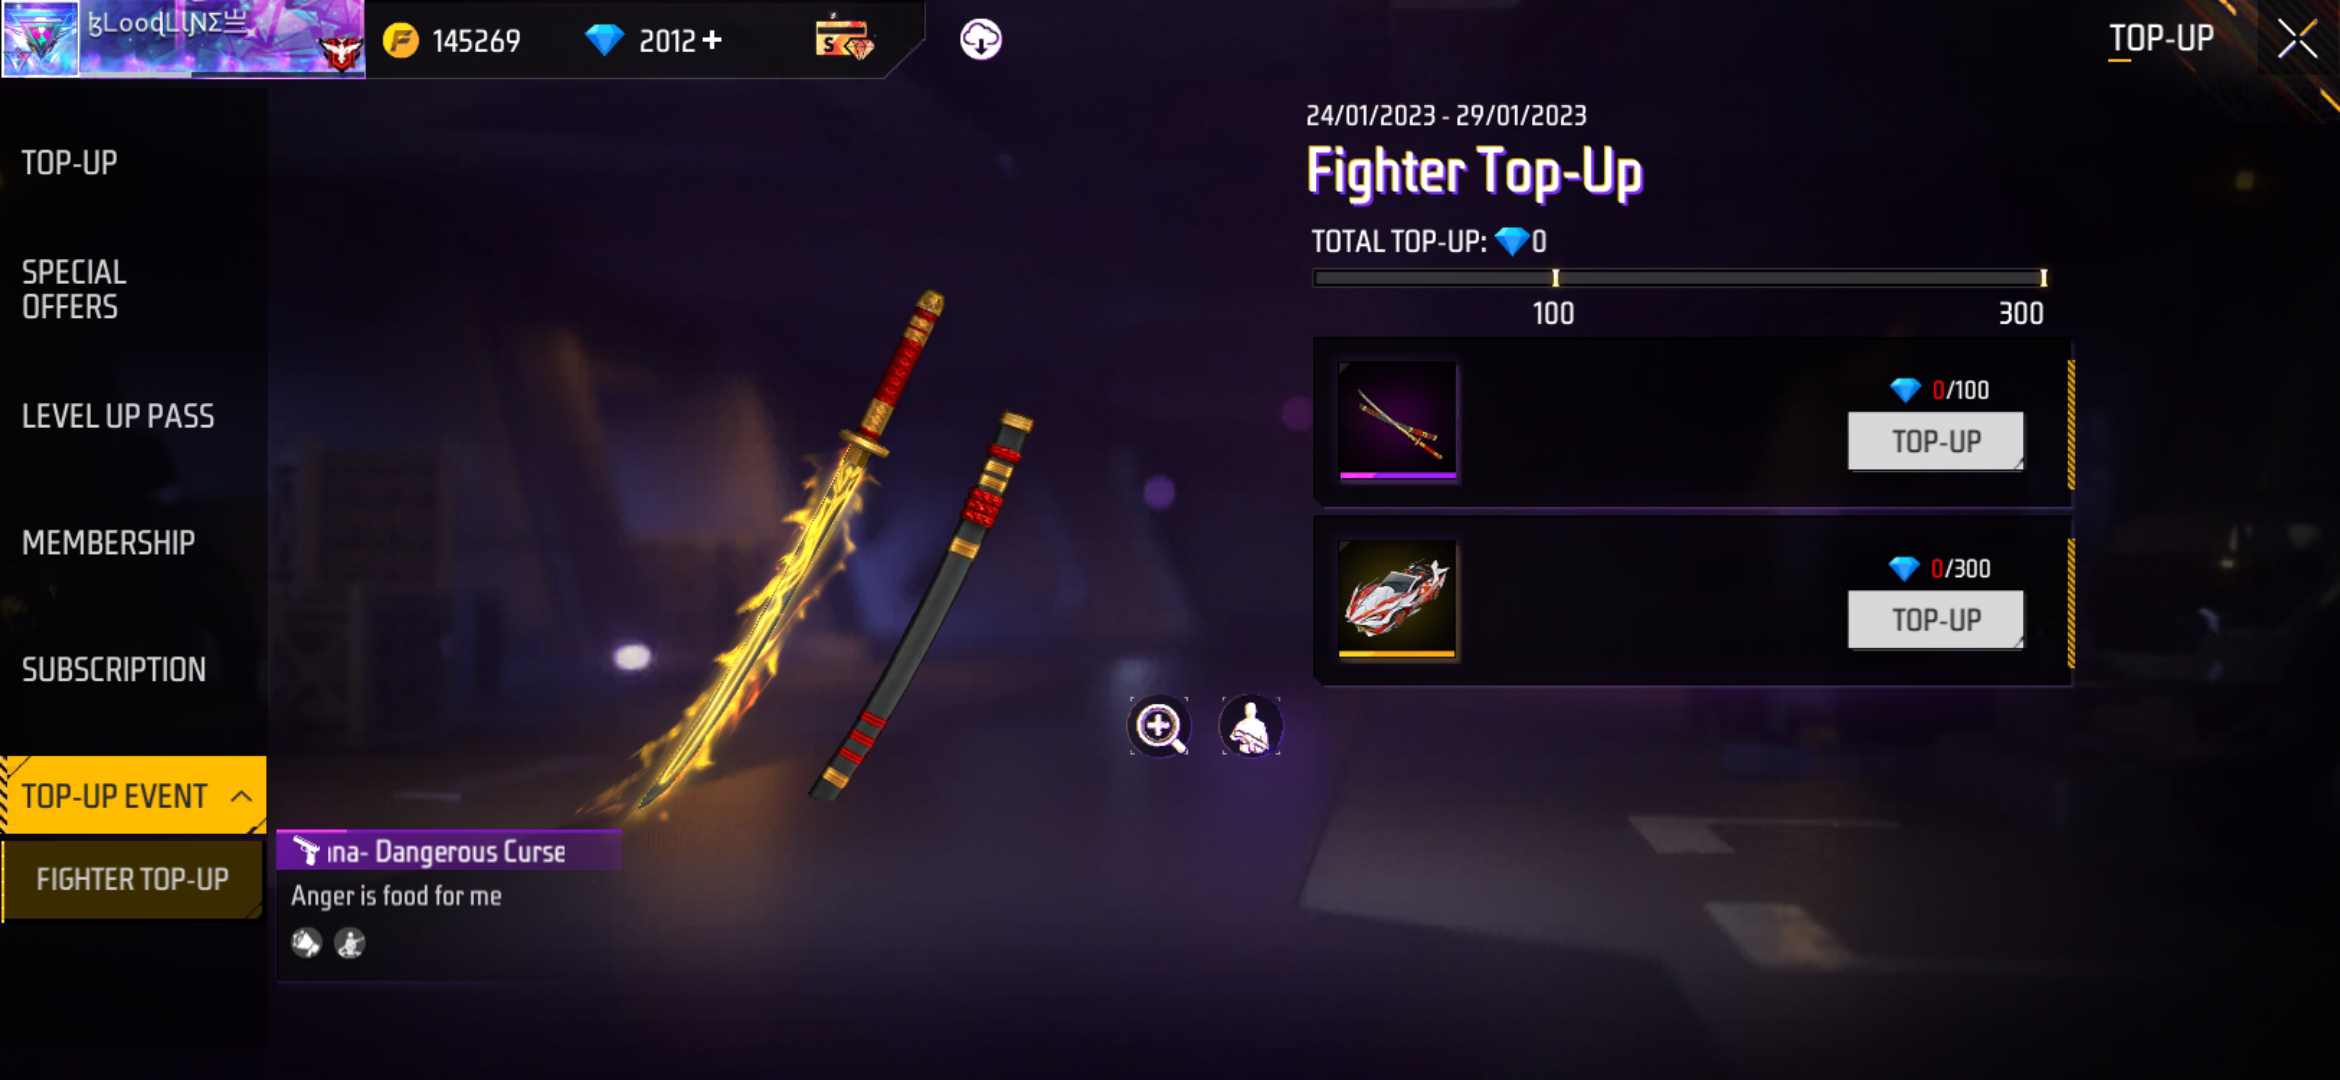 Fighter Top-up: The New Top-up Event In Free Fire